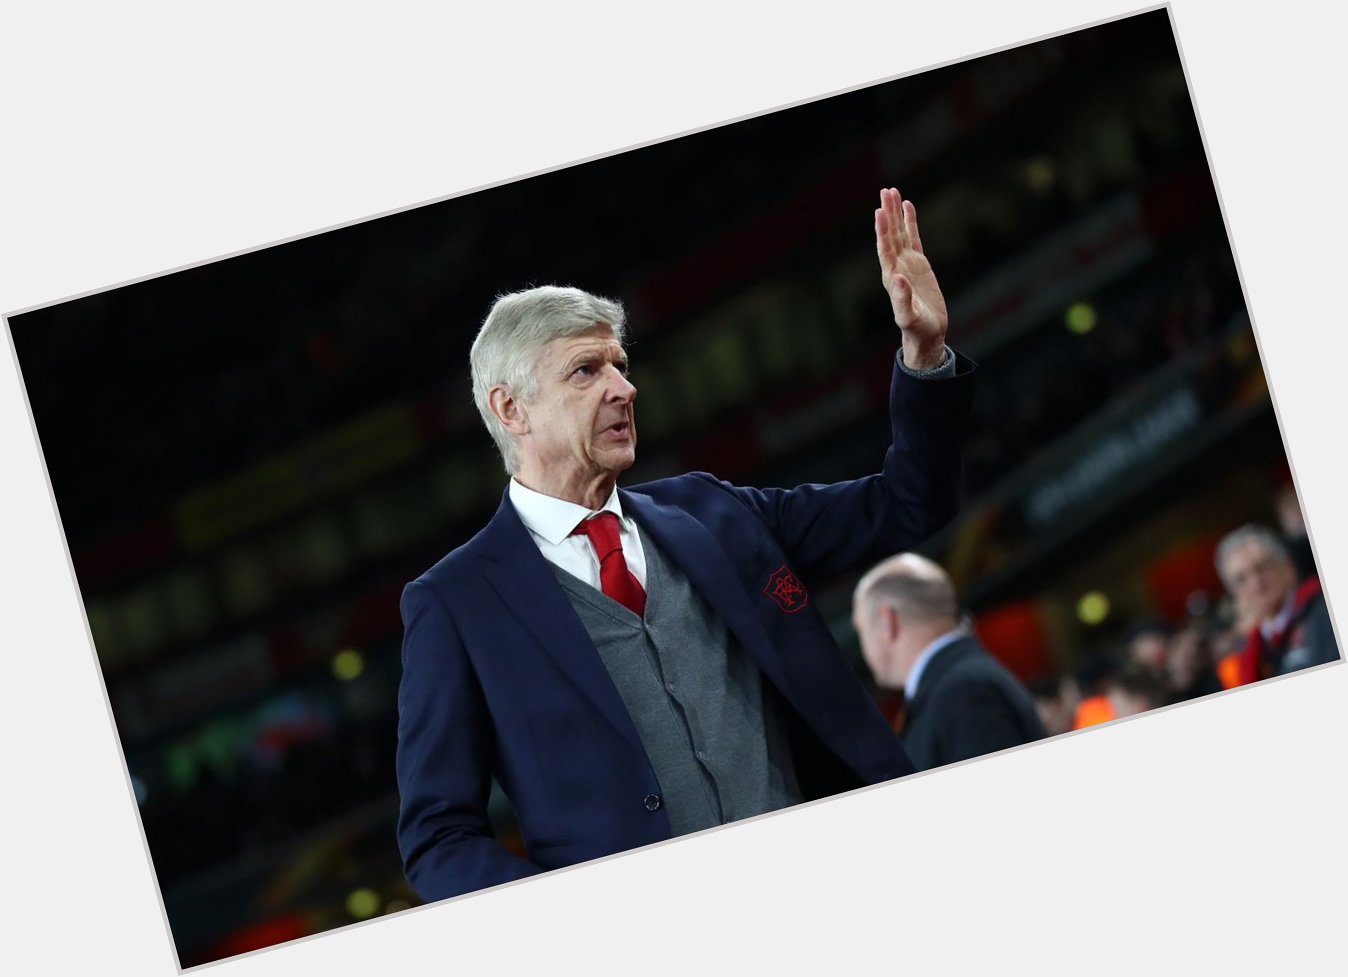 Icon of the game.

Arséne Wenger - From unknown to undefeated

Happy Birthday! 